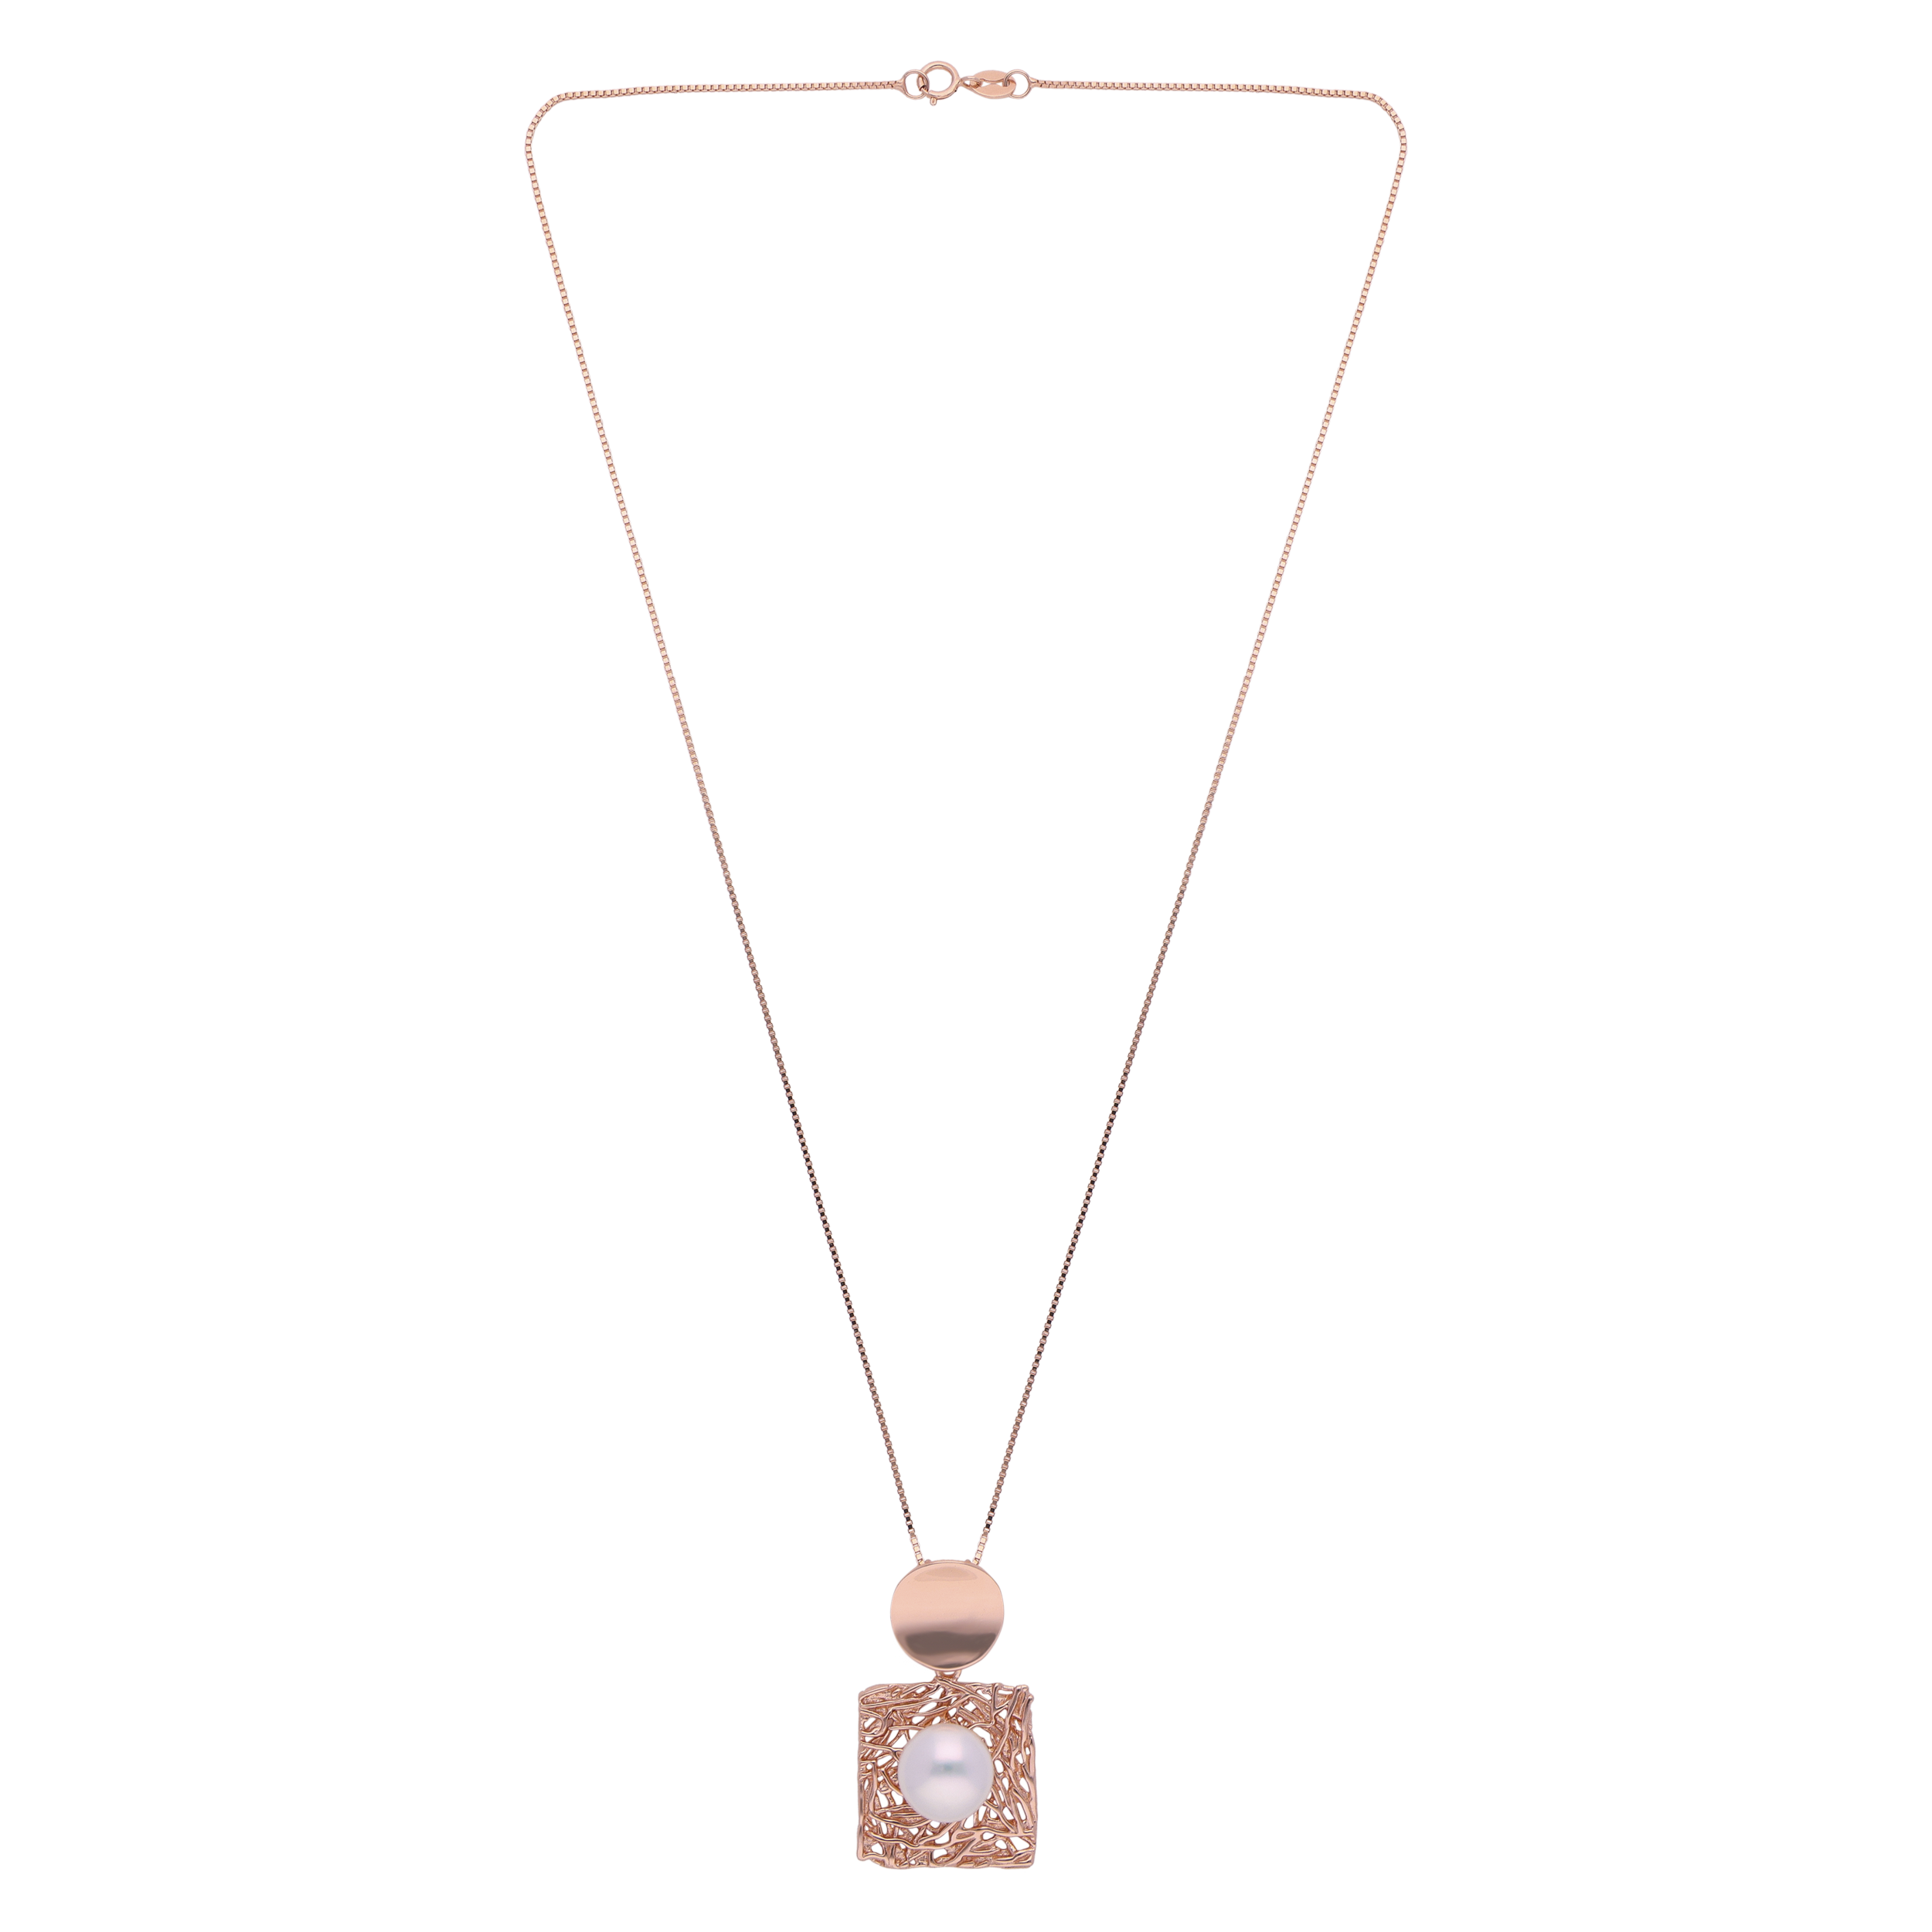 Pearl Radiance: Intricately Designed Sterling Silver Pendant with Rose Gold Polish and Pearl Accent | SKU : 0019892214, 0019892207